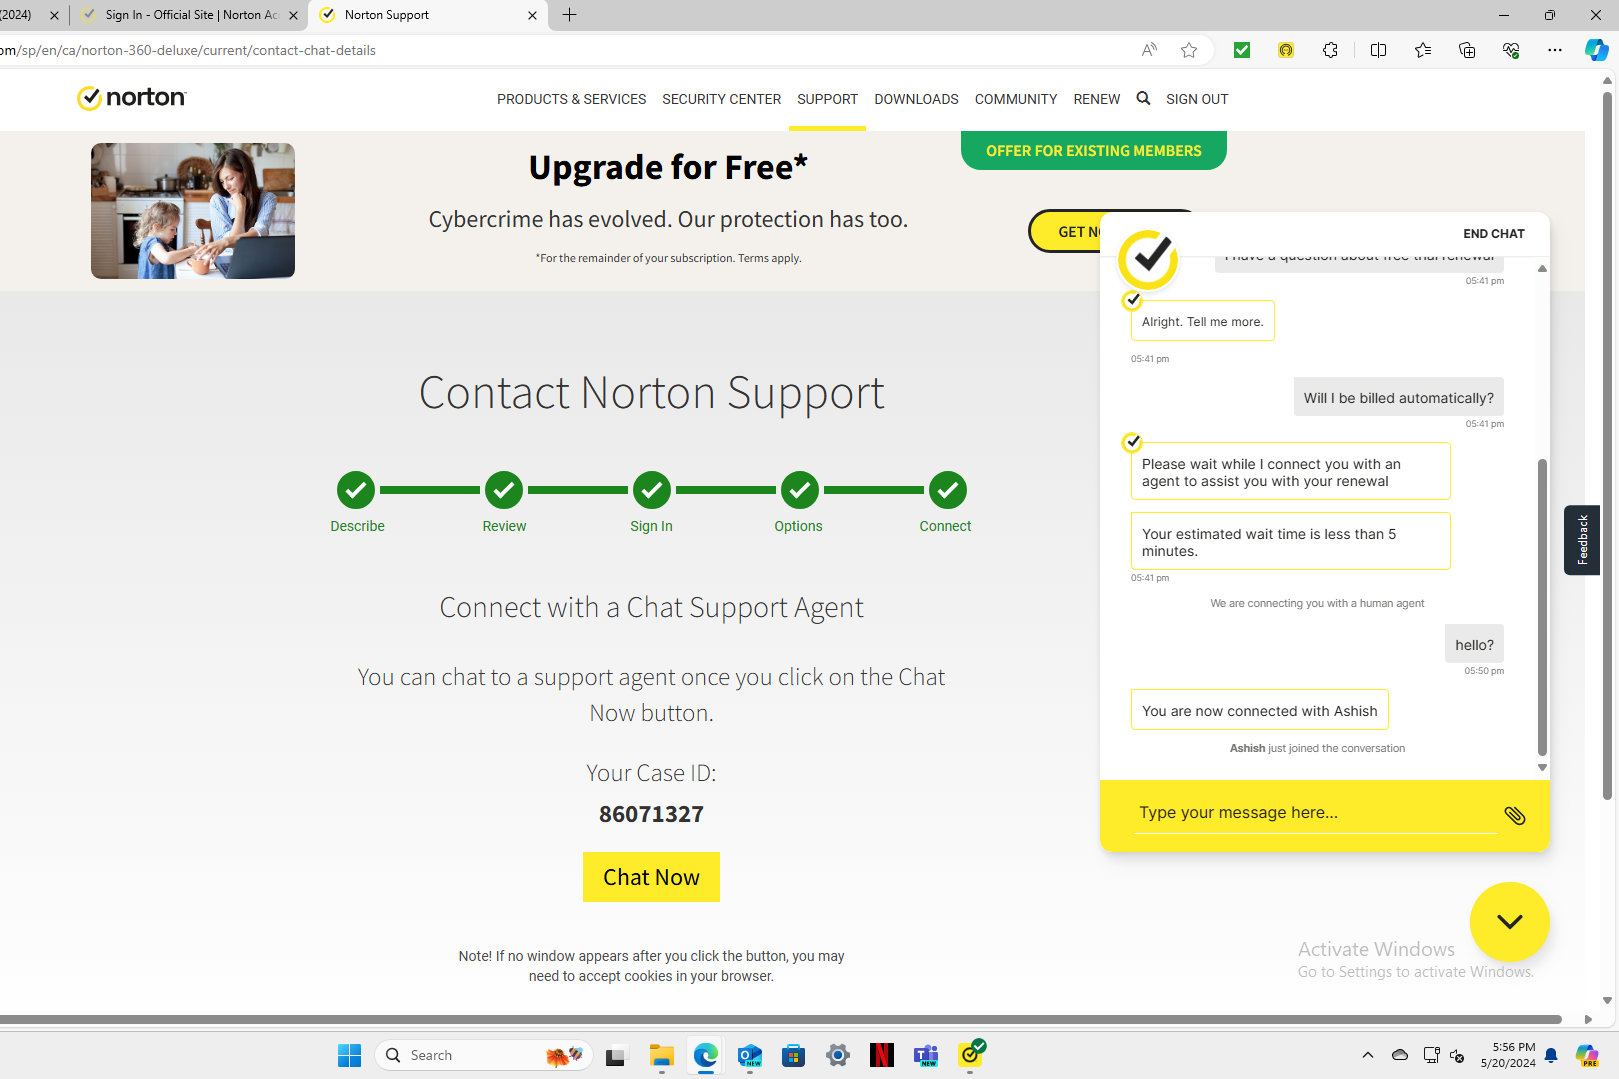 Norton's live chat had a reasonable response time and was helpful.